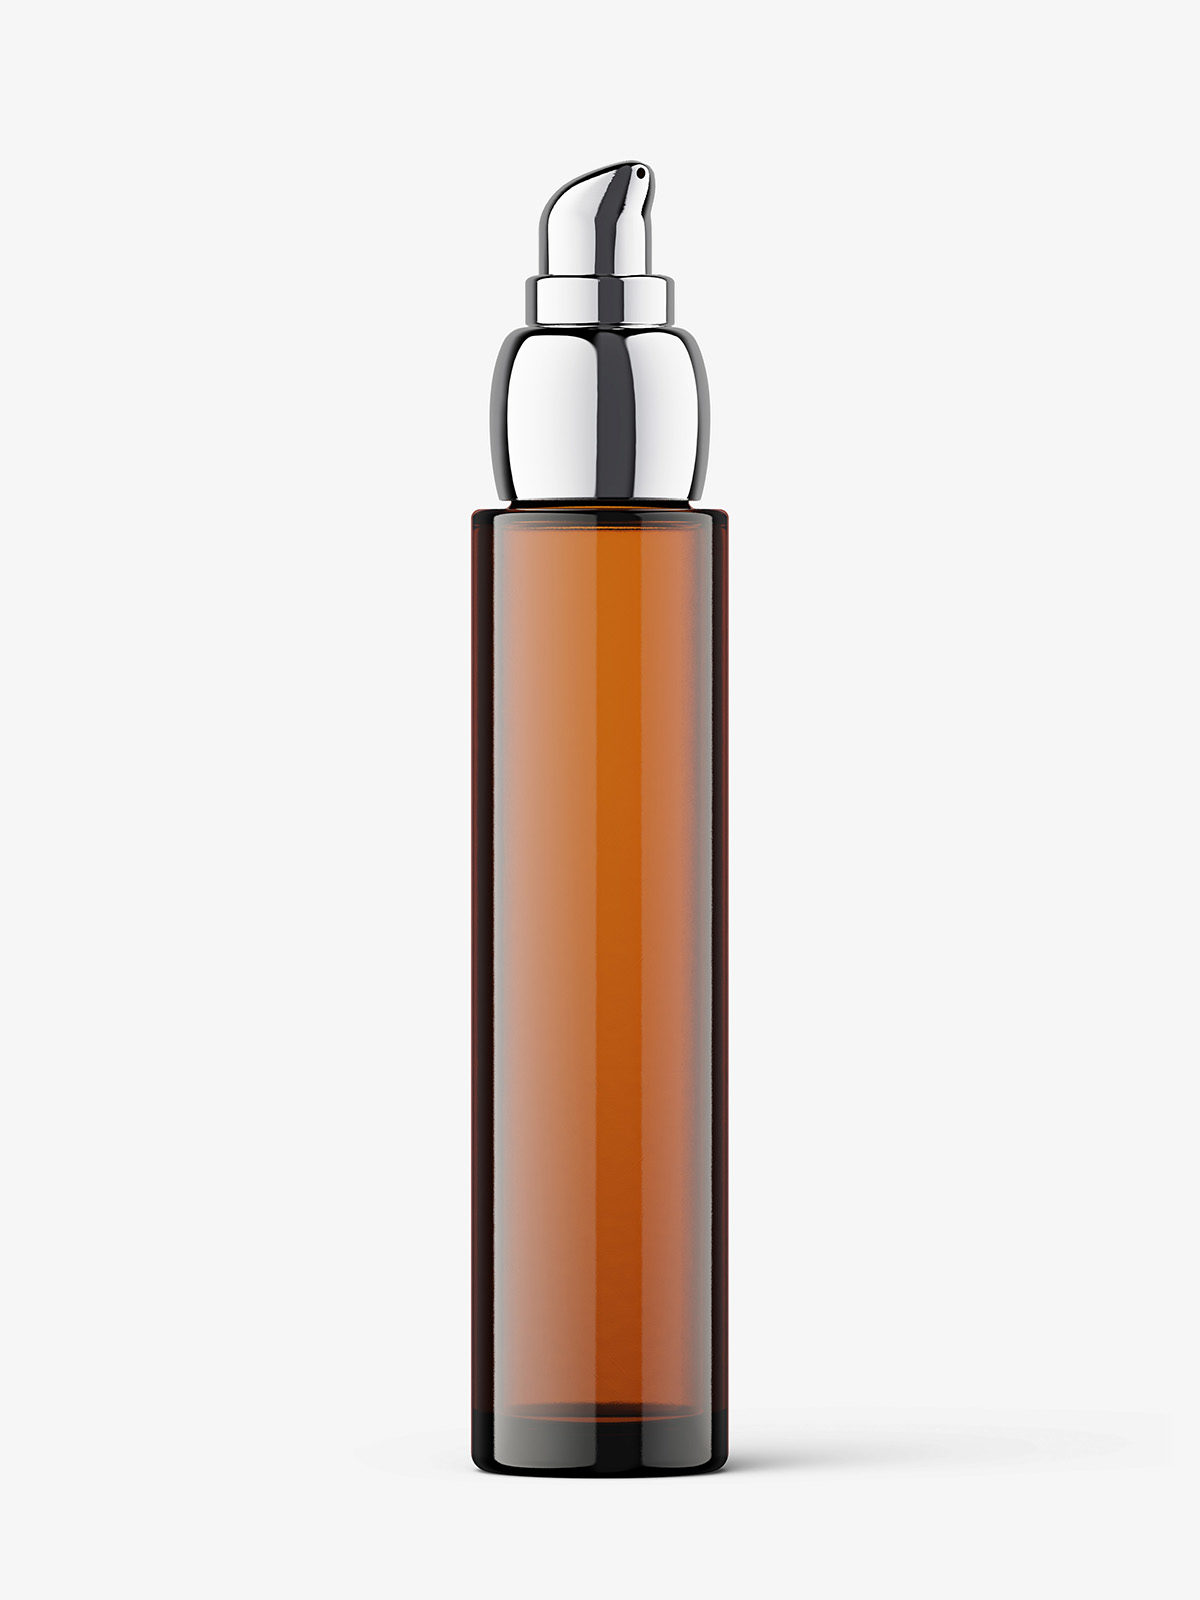 Download Glass Bottle With Airless Pump Mockup Amber Smarty Mockups Yellowimages Mockups